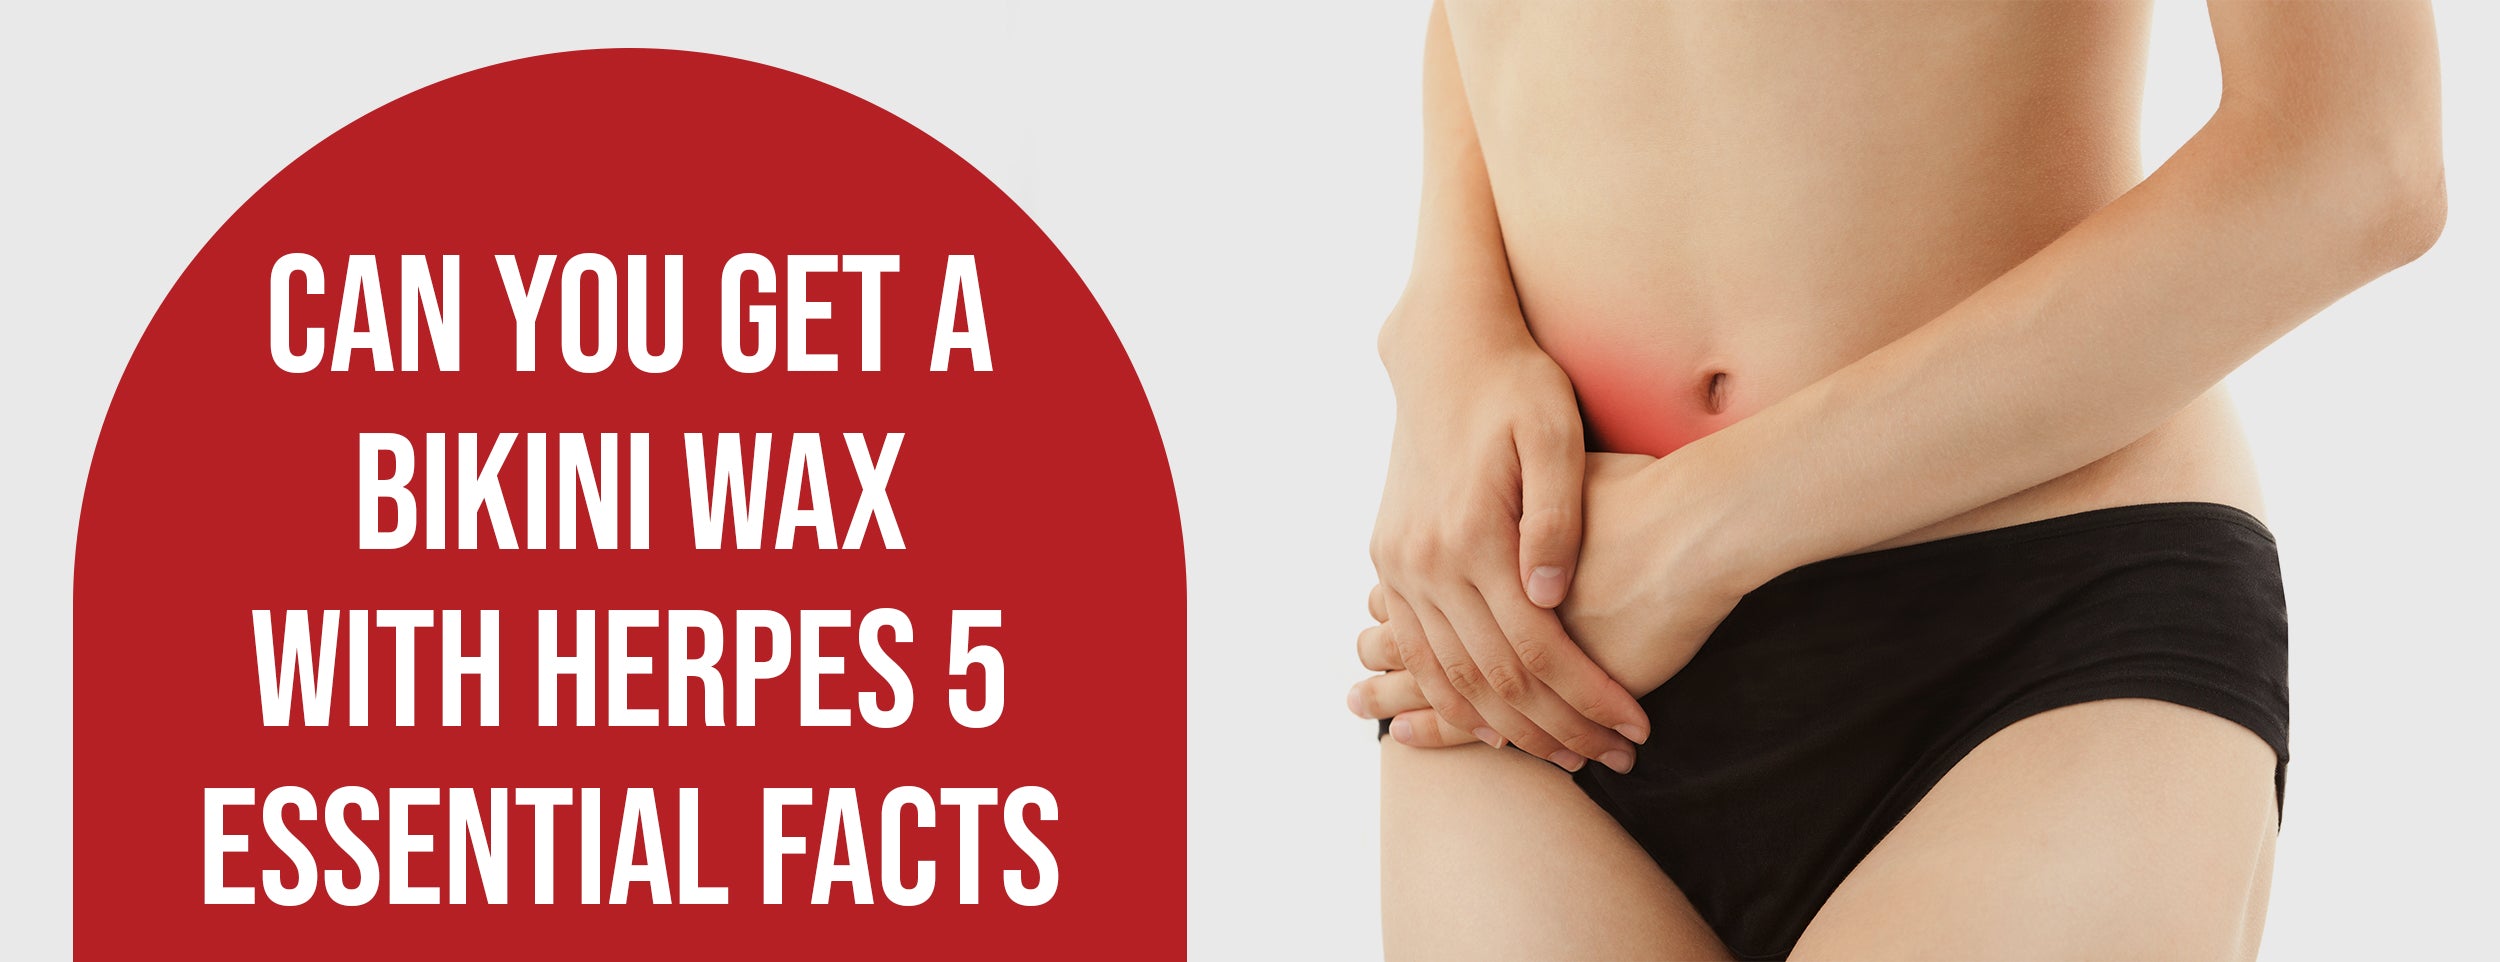 Five Facts About Bikini Waxes and Herpes